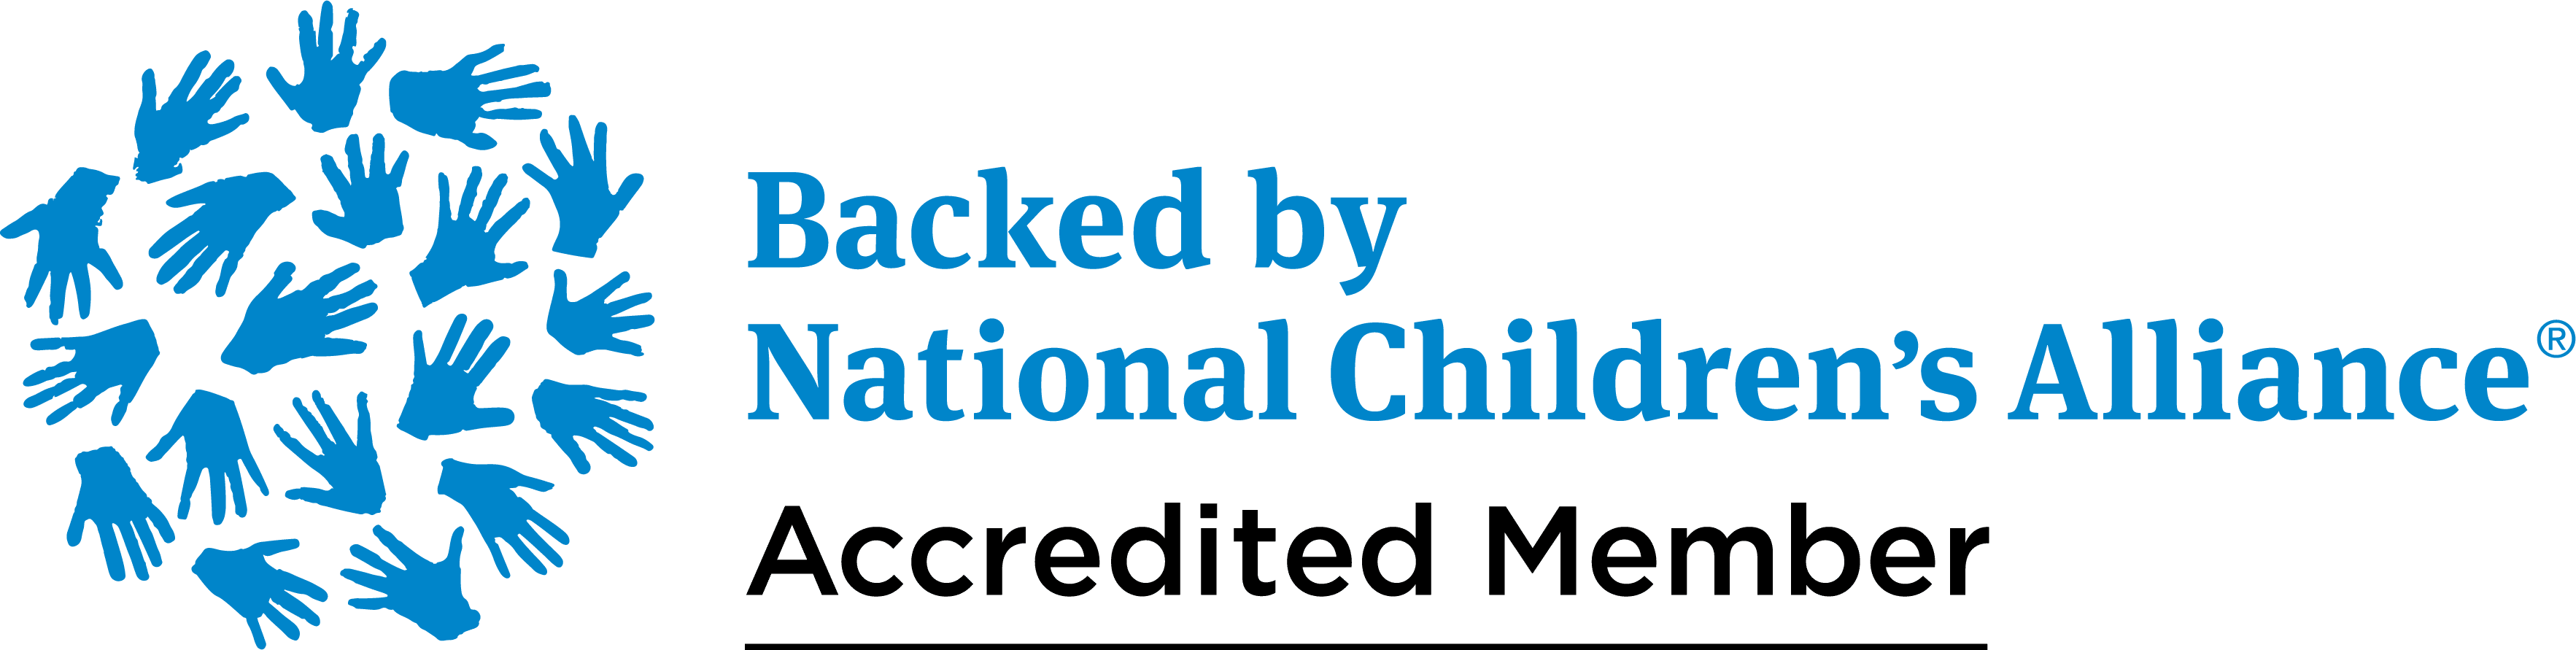 Backed by National Children's Alliance Accredited Member